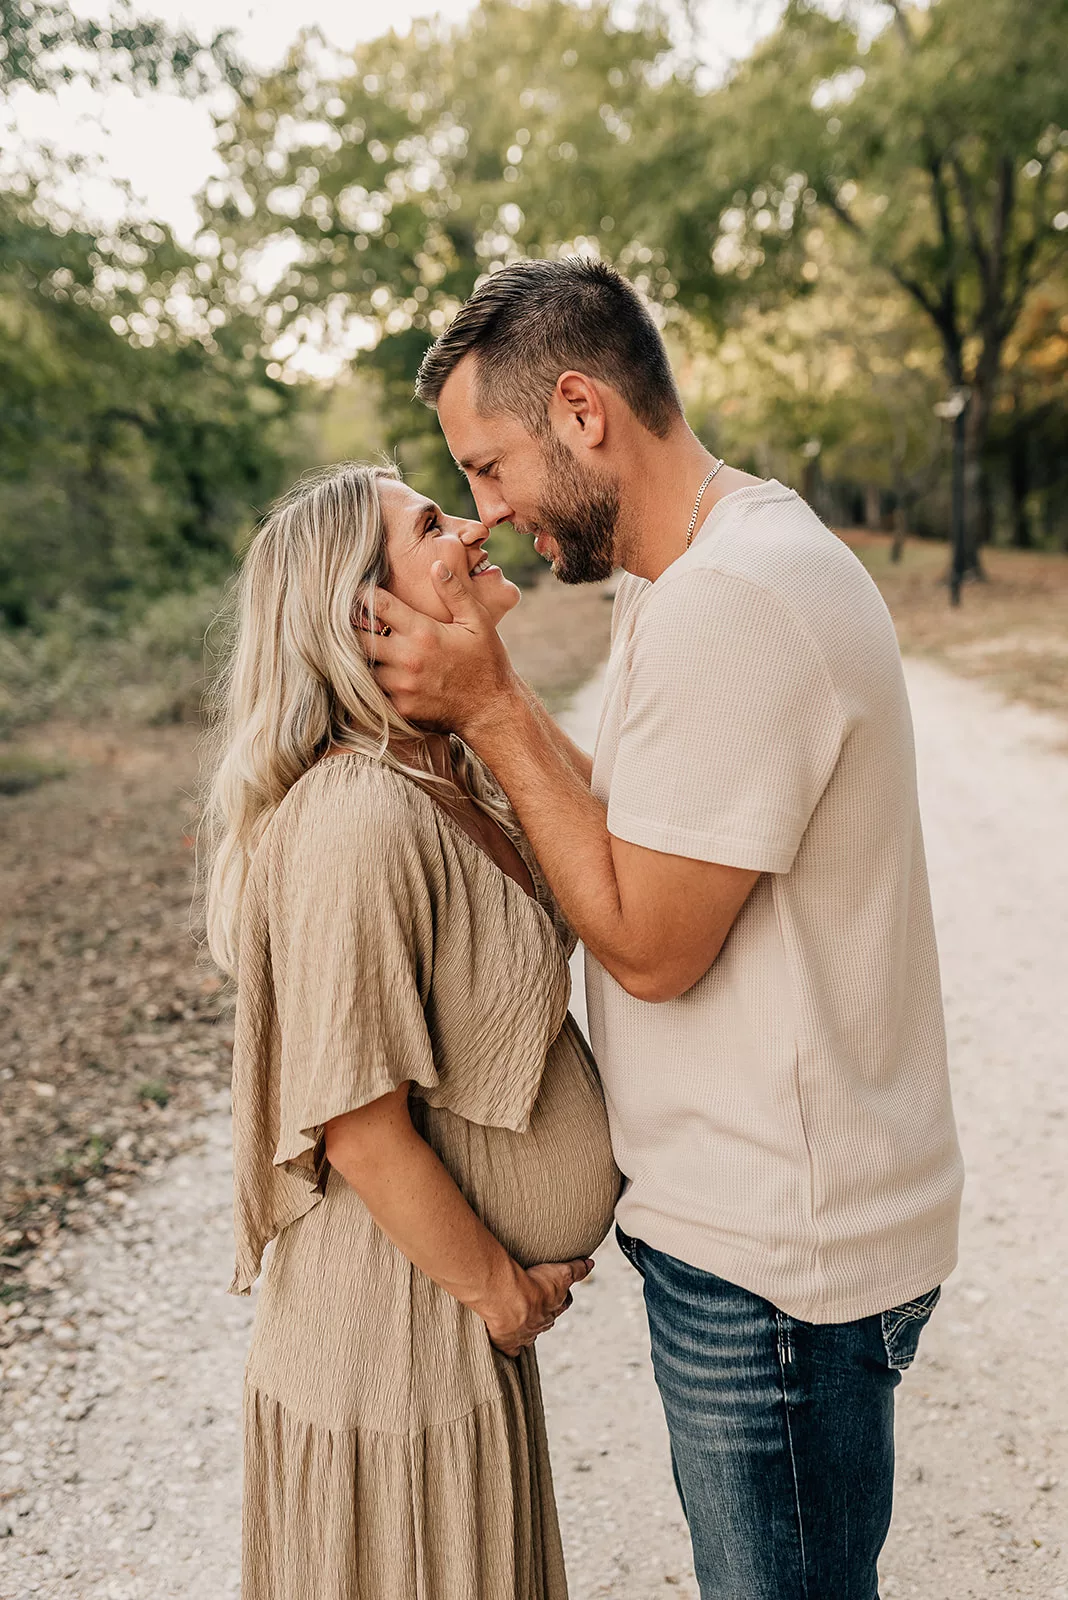 A mom to be touches noses with her husband as they stand in a gravel park path